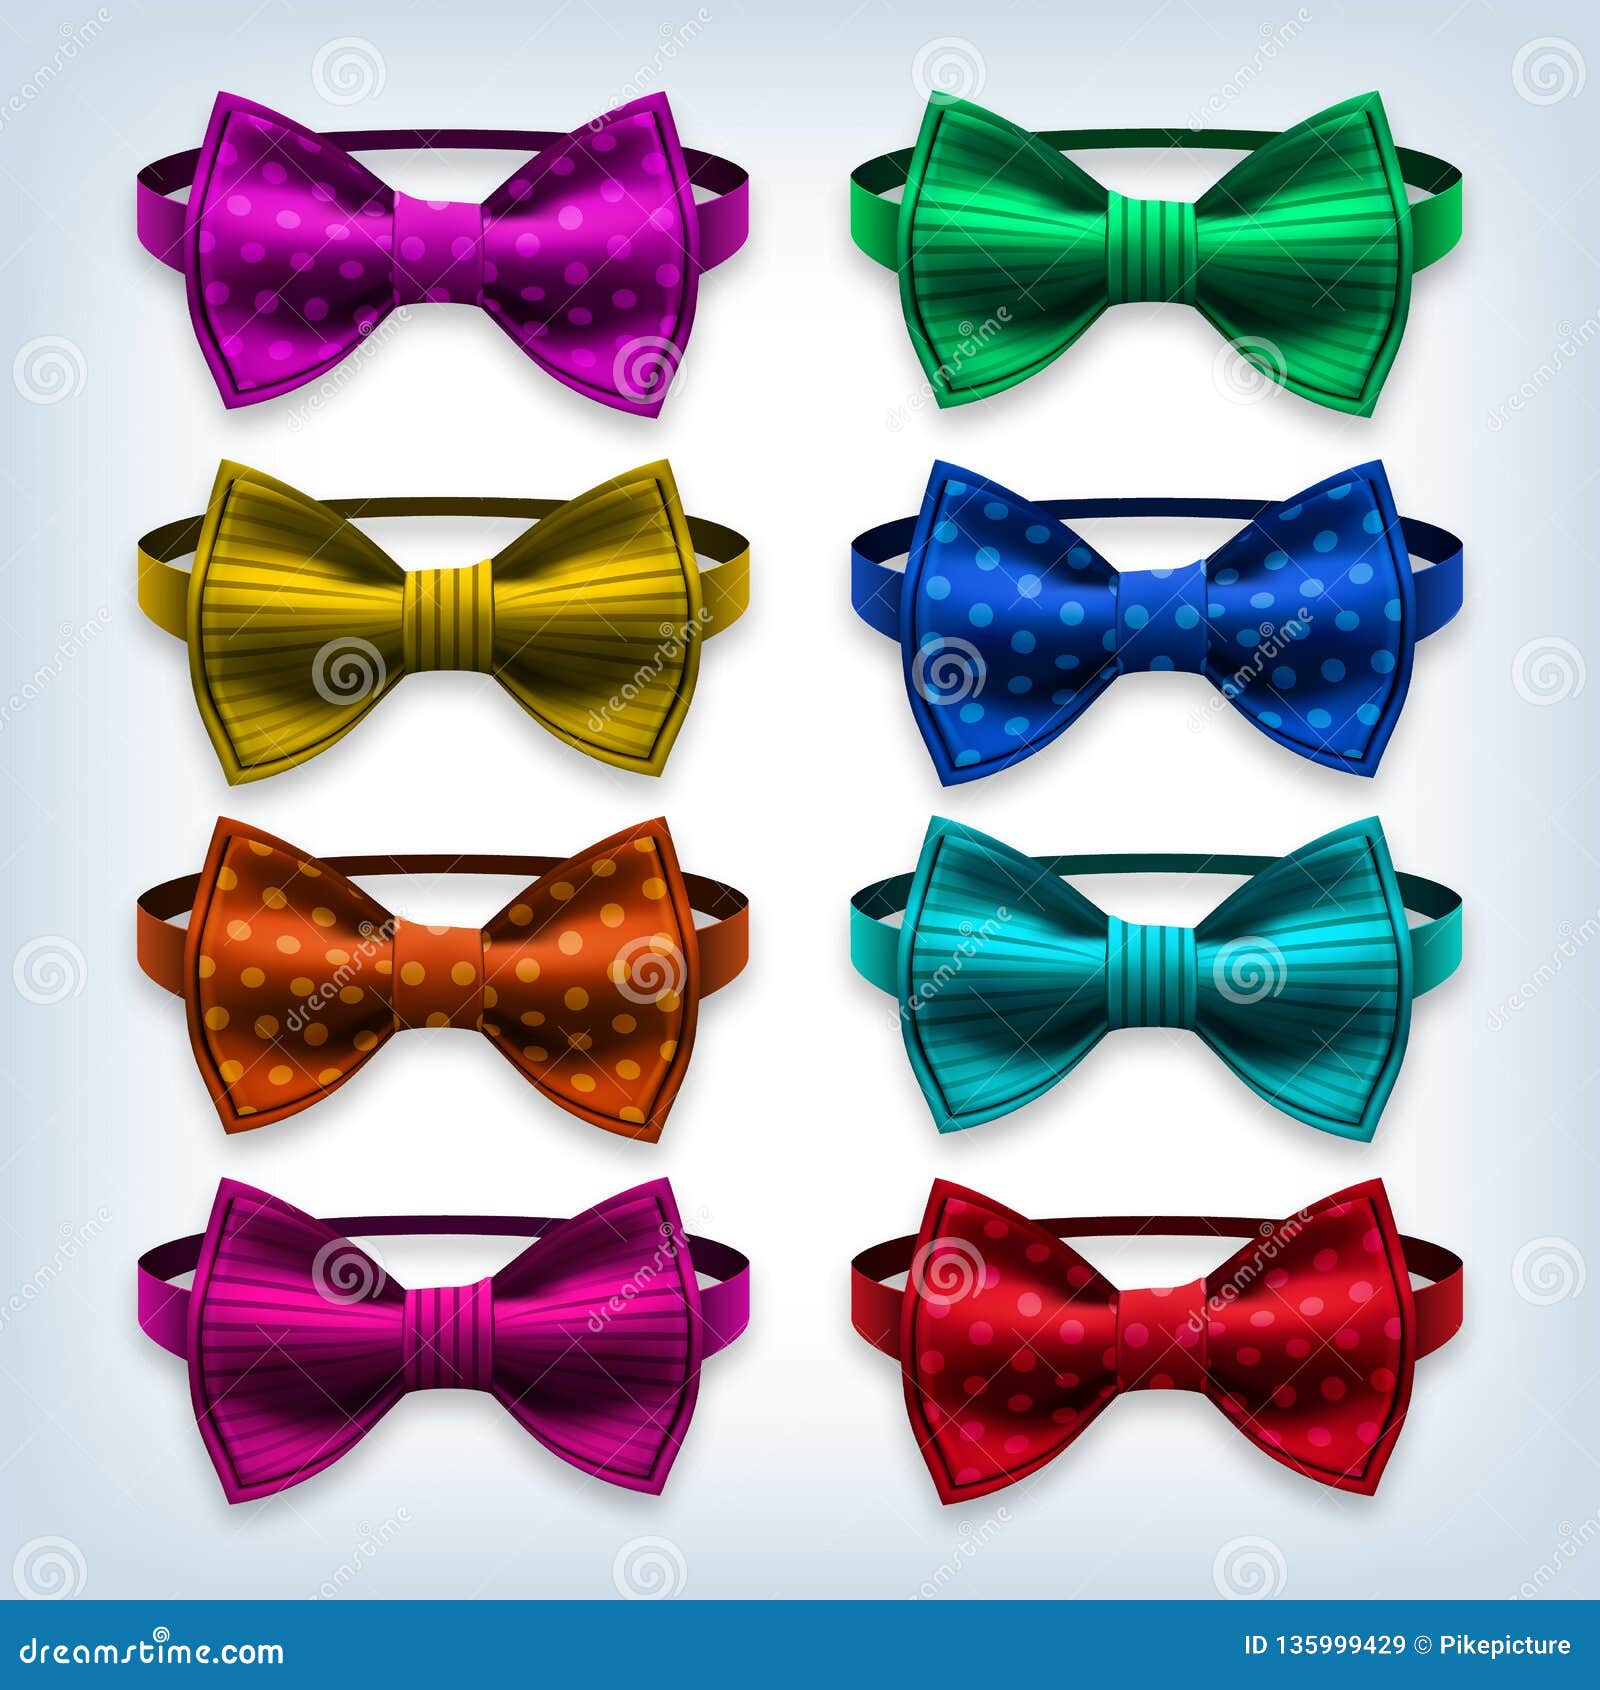 Bow Tie Set Vector. Hipster, Gentleman. Realistic Knot Silk Bow ...